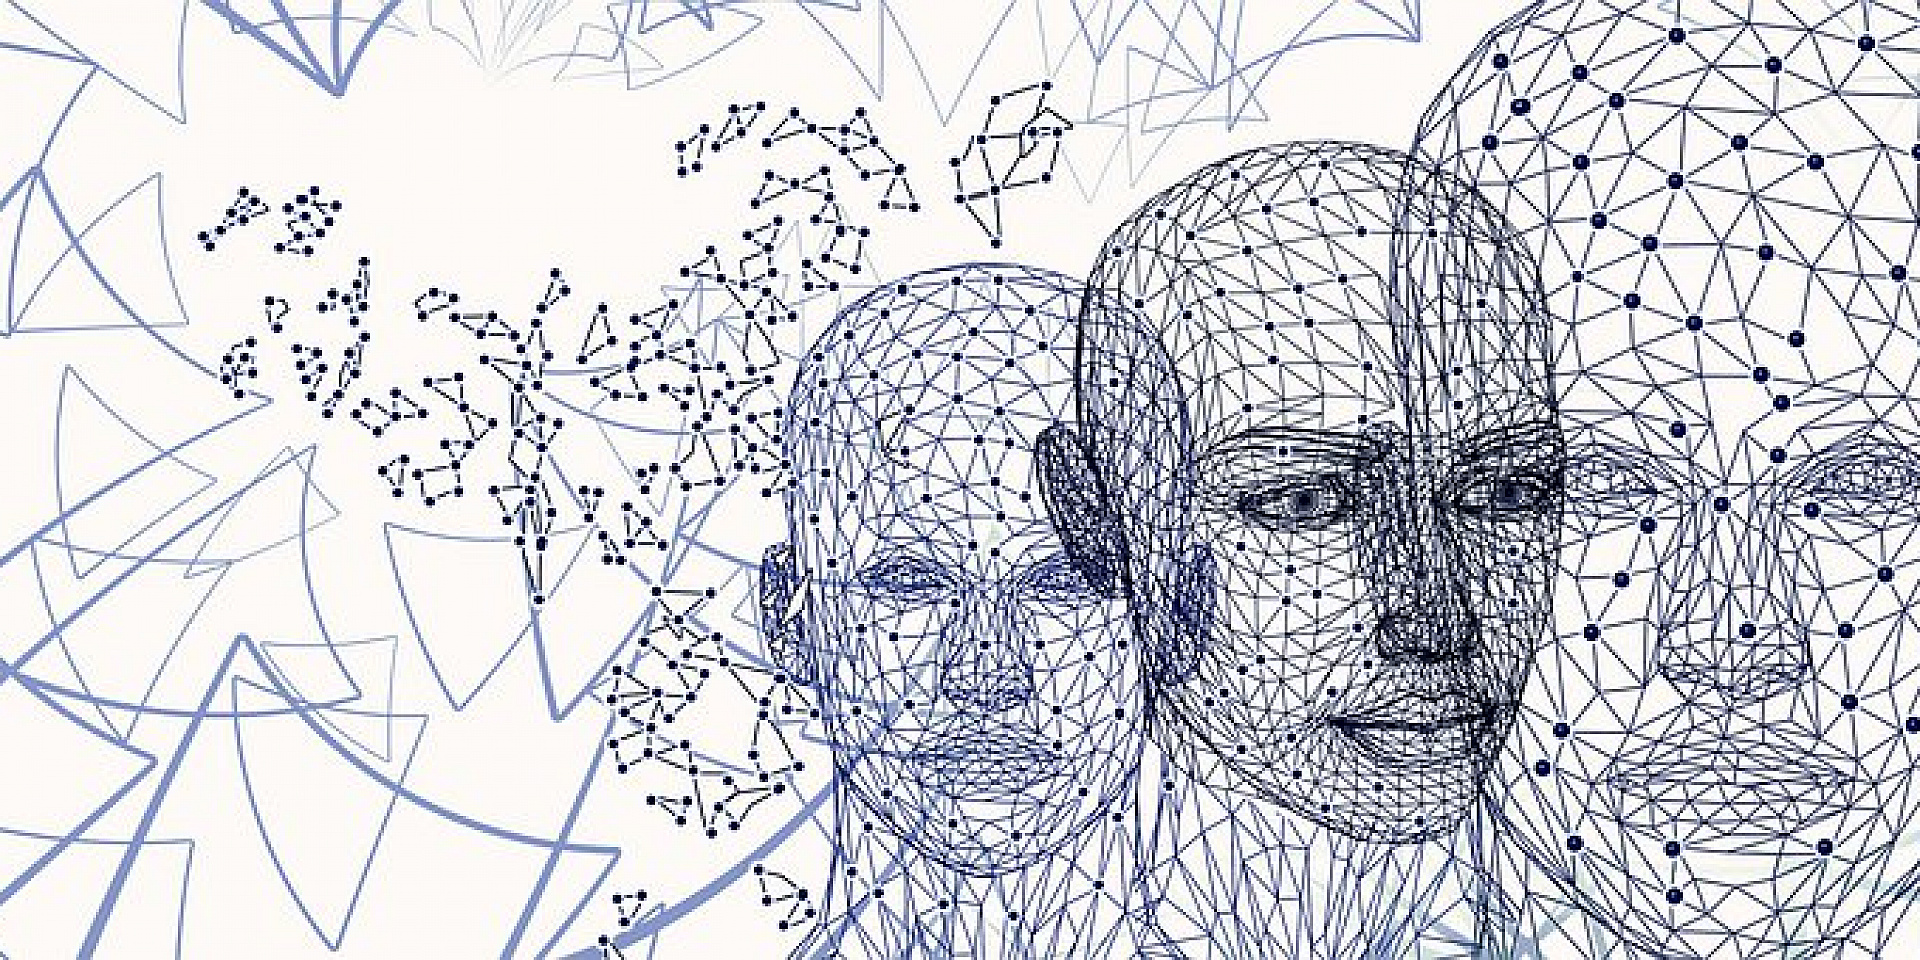 Illustration of human faces created by connecting fibers